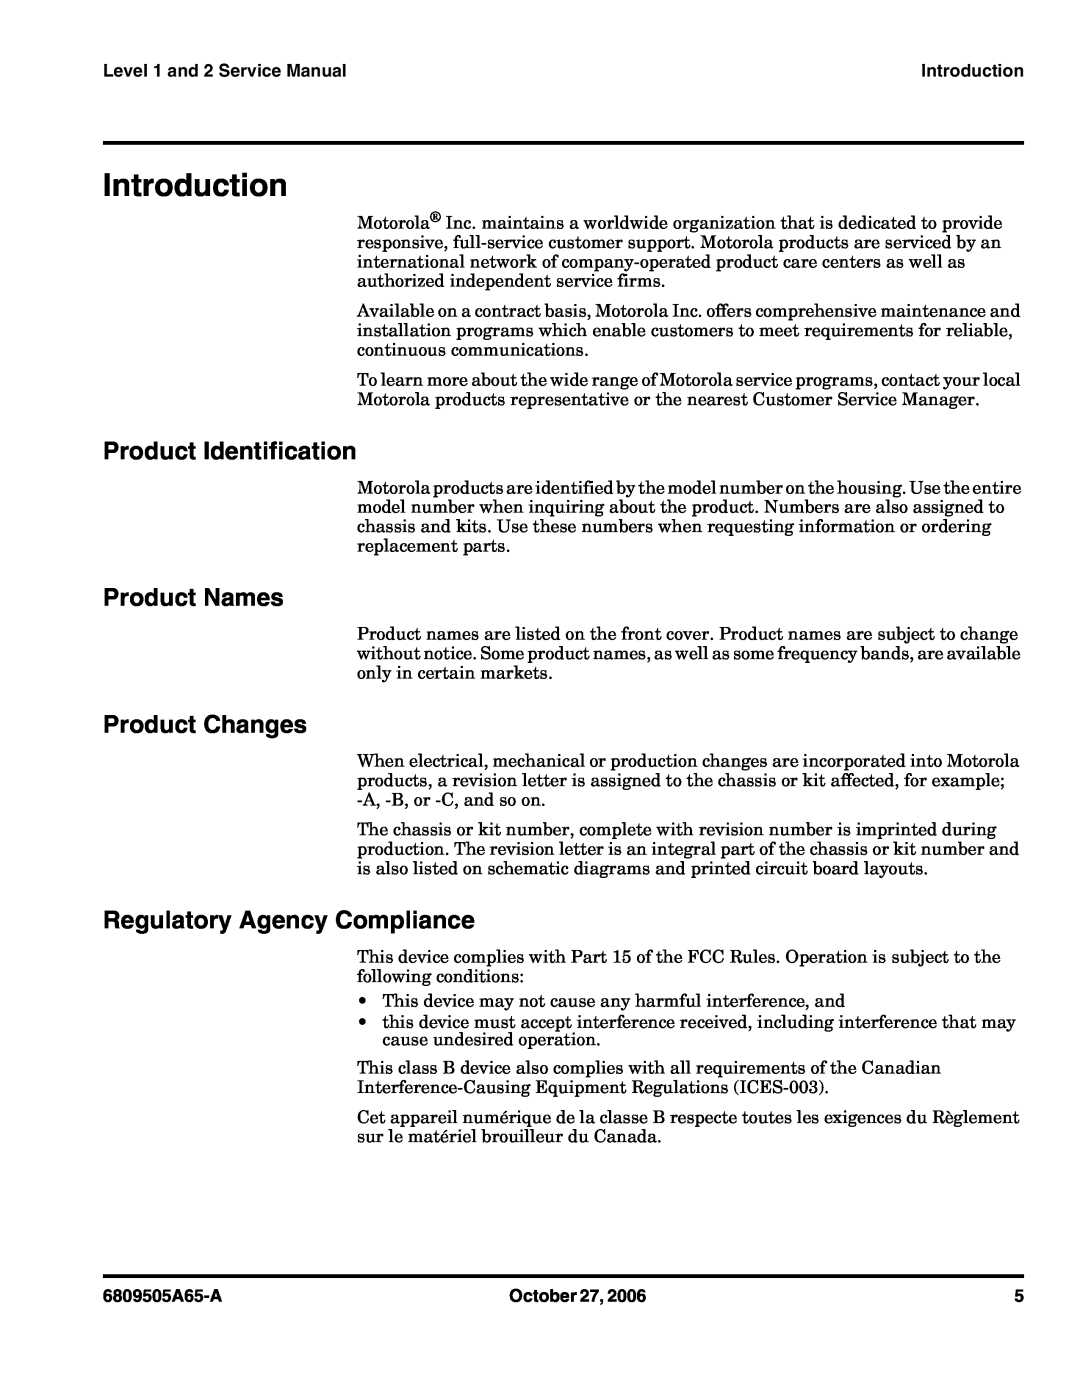 Motorola F3 Introduction, Product Identification, Product Names, Product Changes, Regulatory Agency Compliance, October 27 